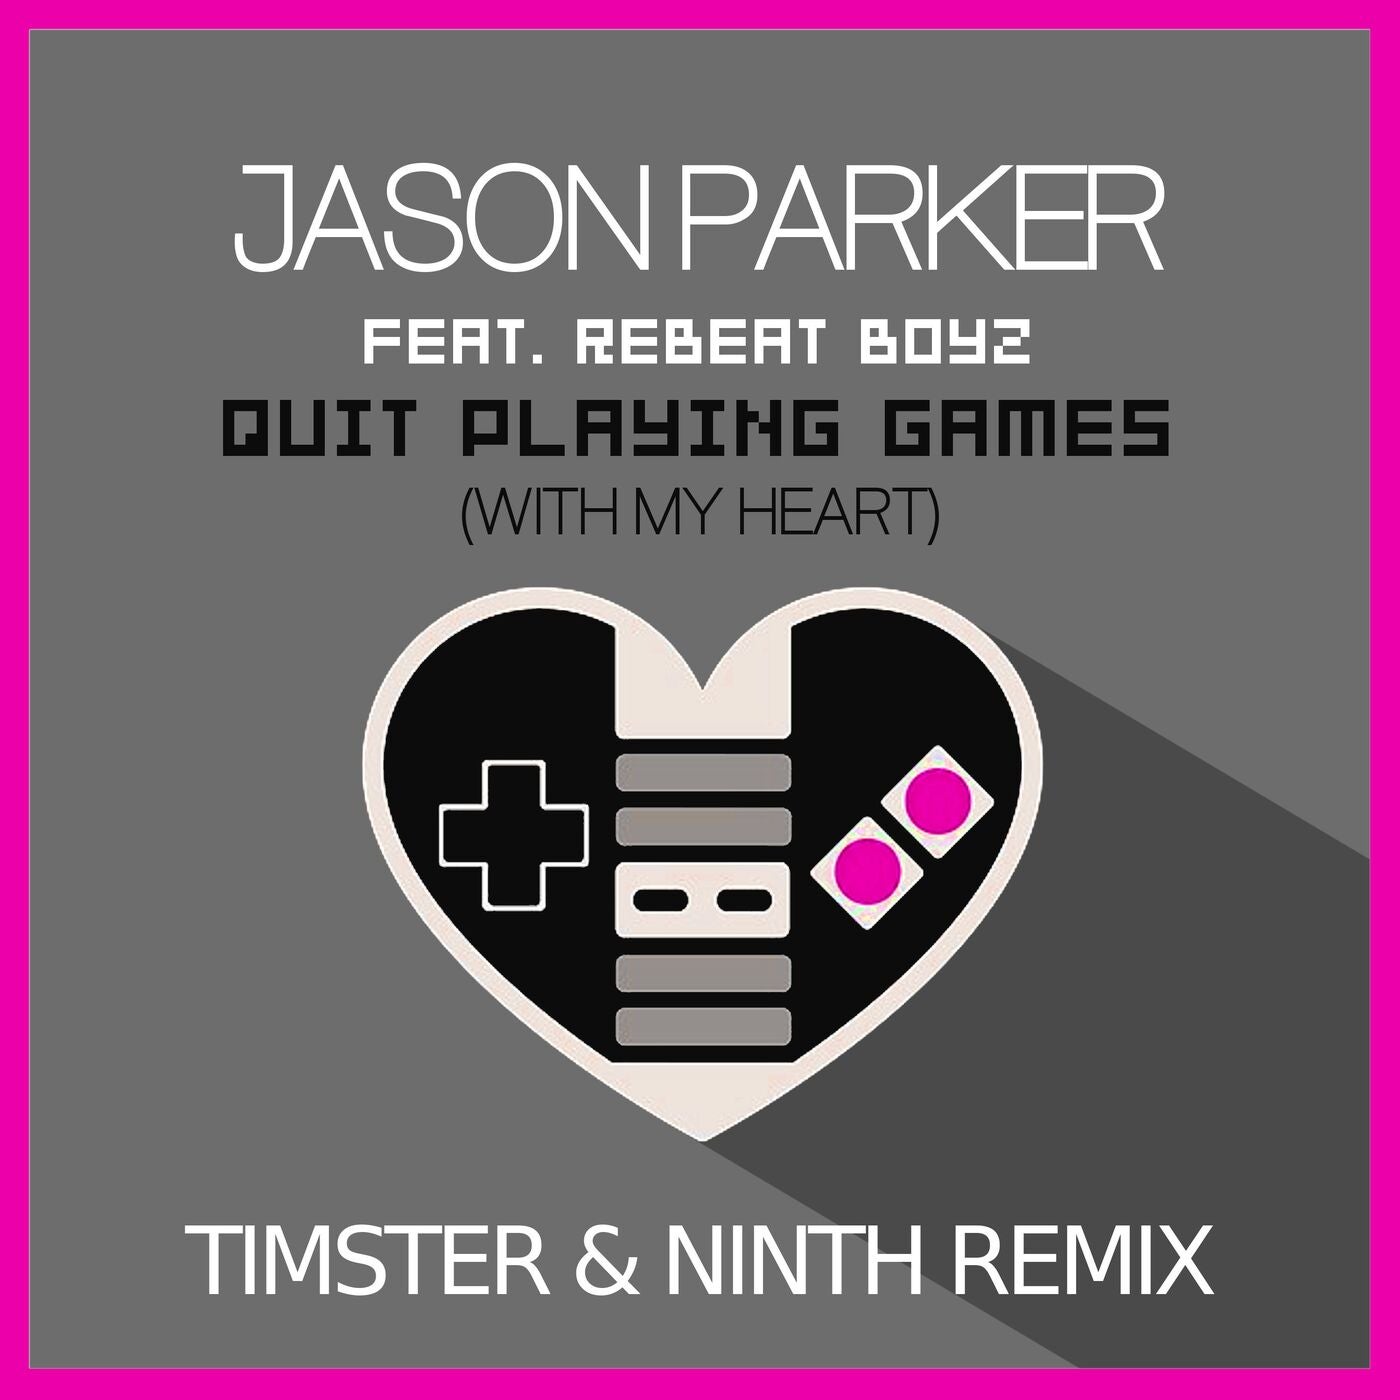 Jason Parker feat. ReBeat Boys - Quit Playing Games (With My Heart) (Timster & Ninth Remix)